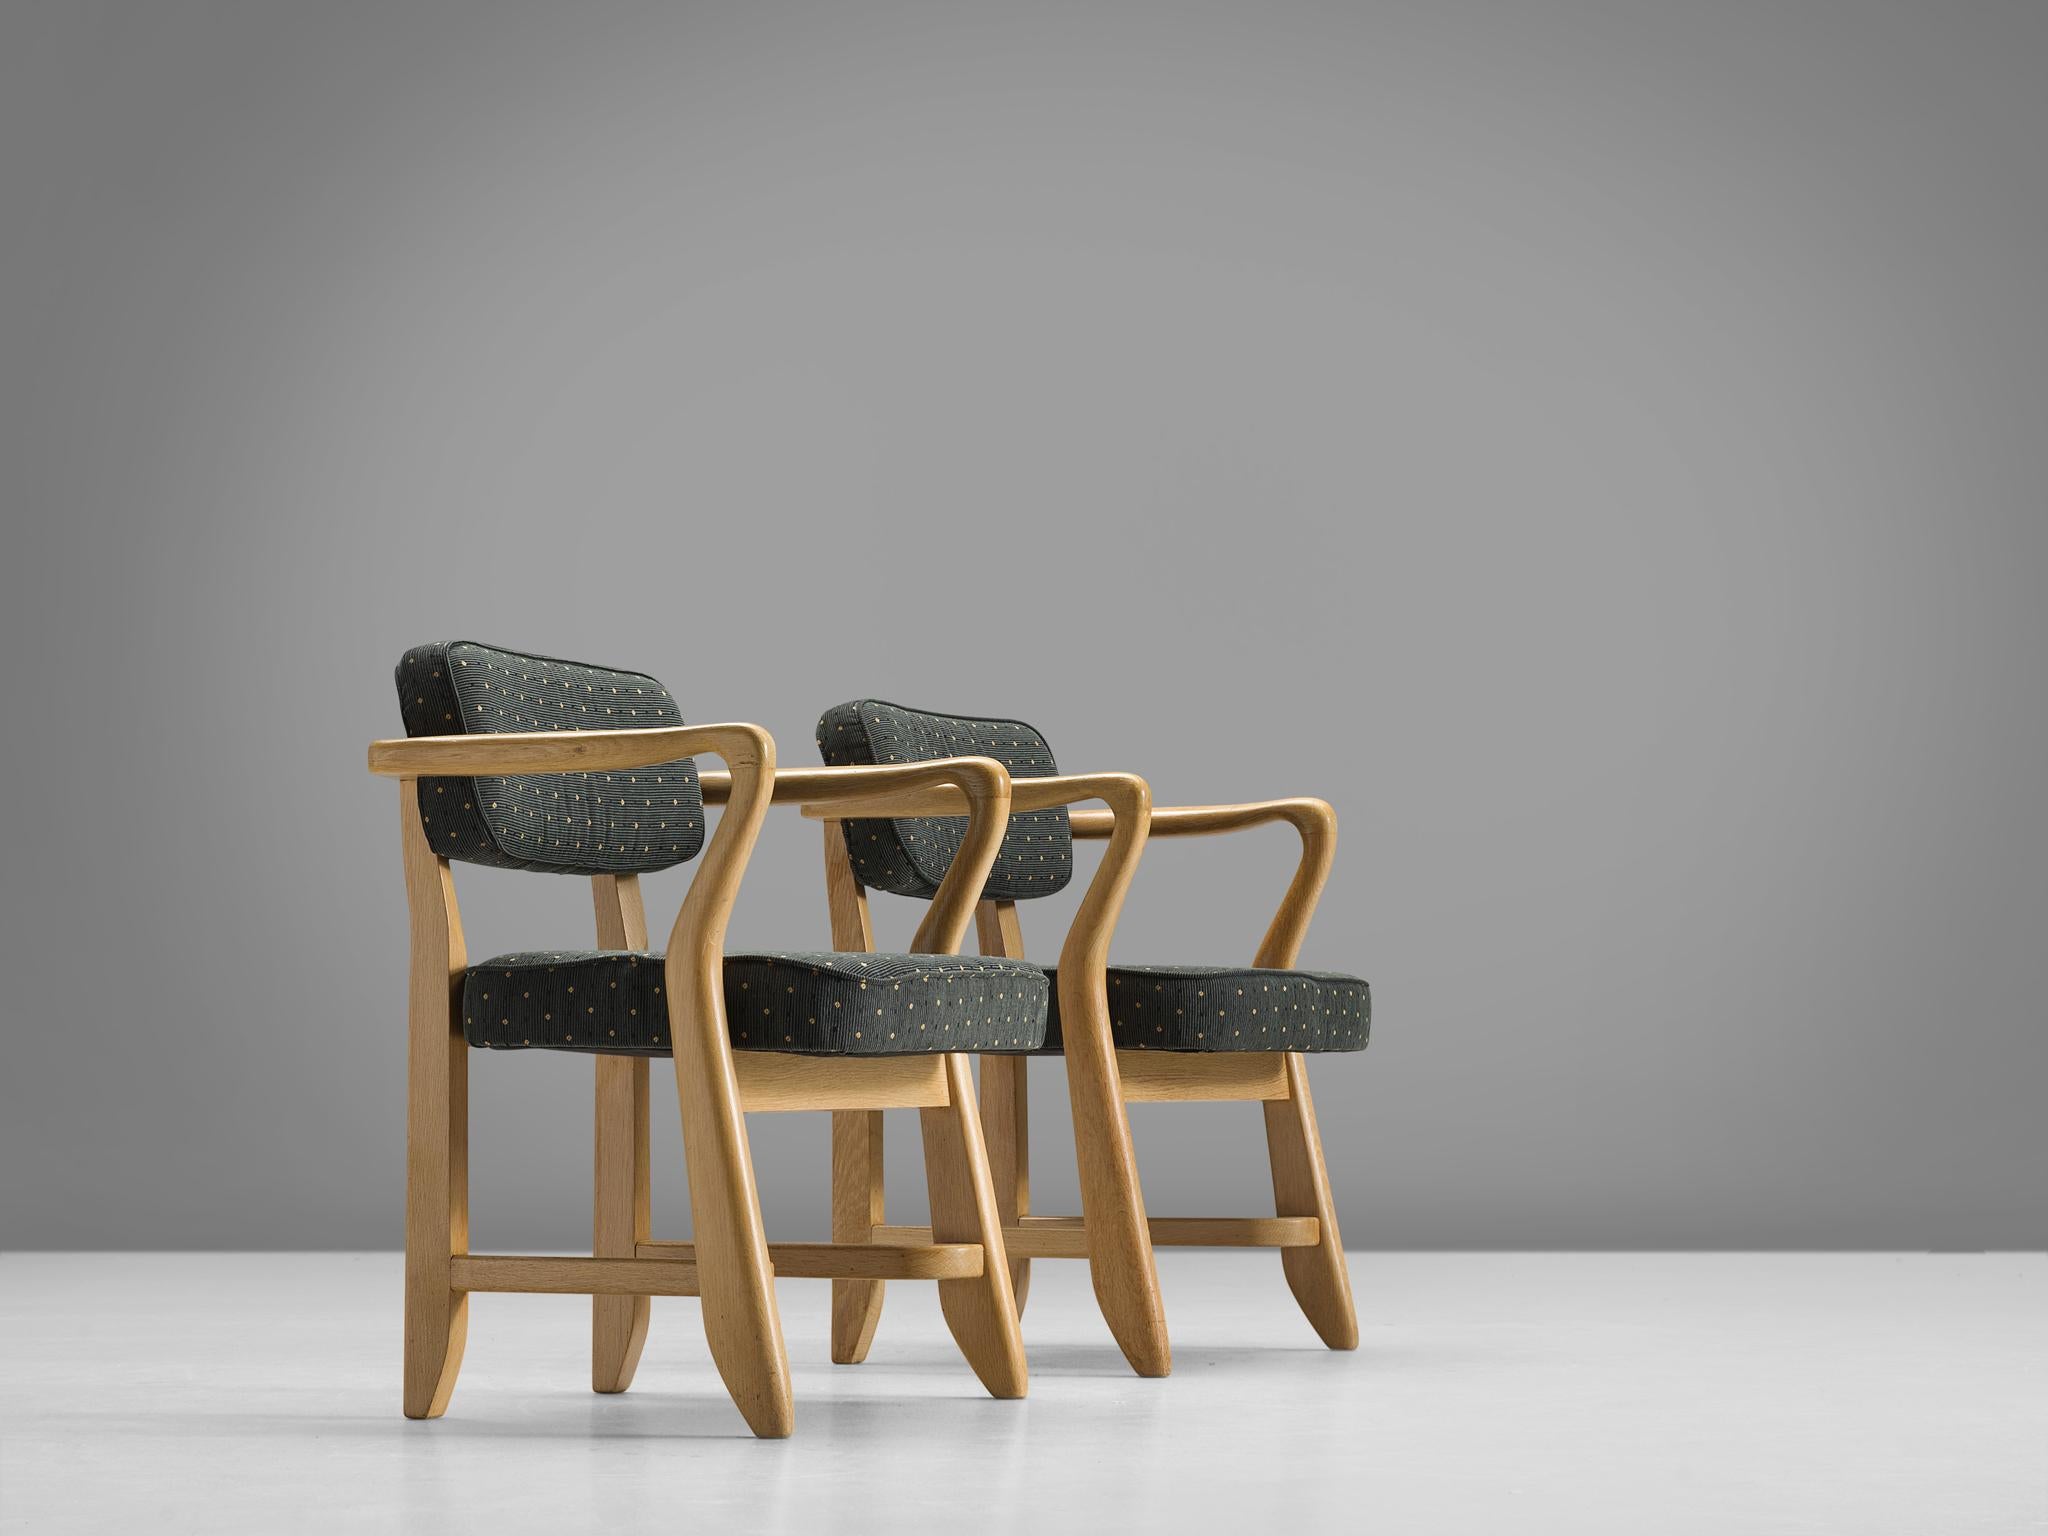 Guillerme et Chambron, armchairs, model 'Denis', green fabric, oak, France, 1950s

These sculptural armchairs are designed by Guillerme et Chambron. The duo is known for their high quality solid oak furniture. These sculptural armchairs have an